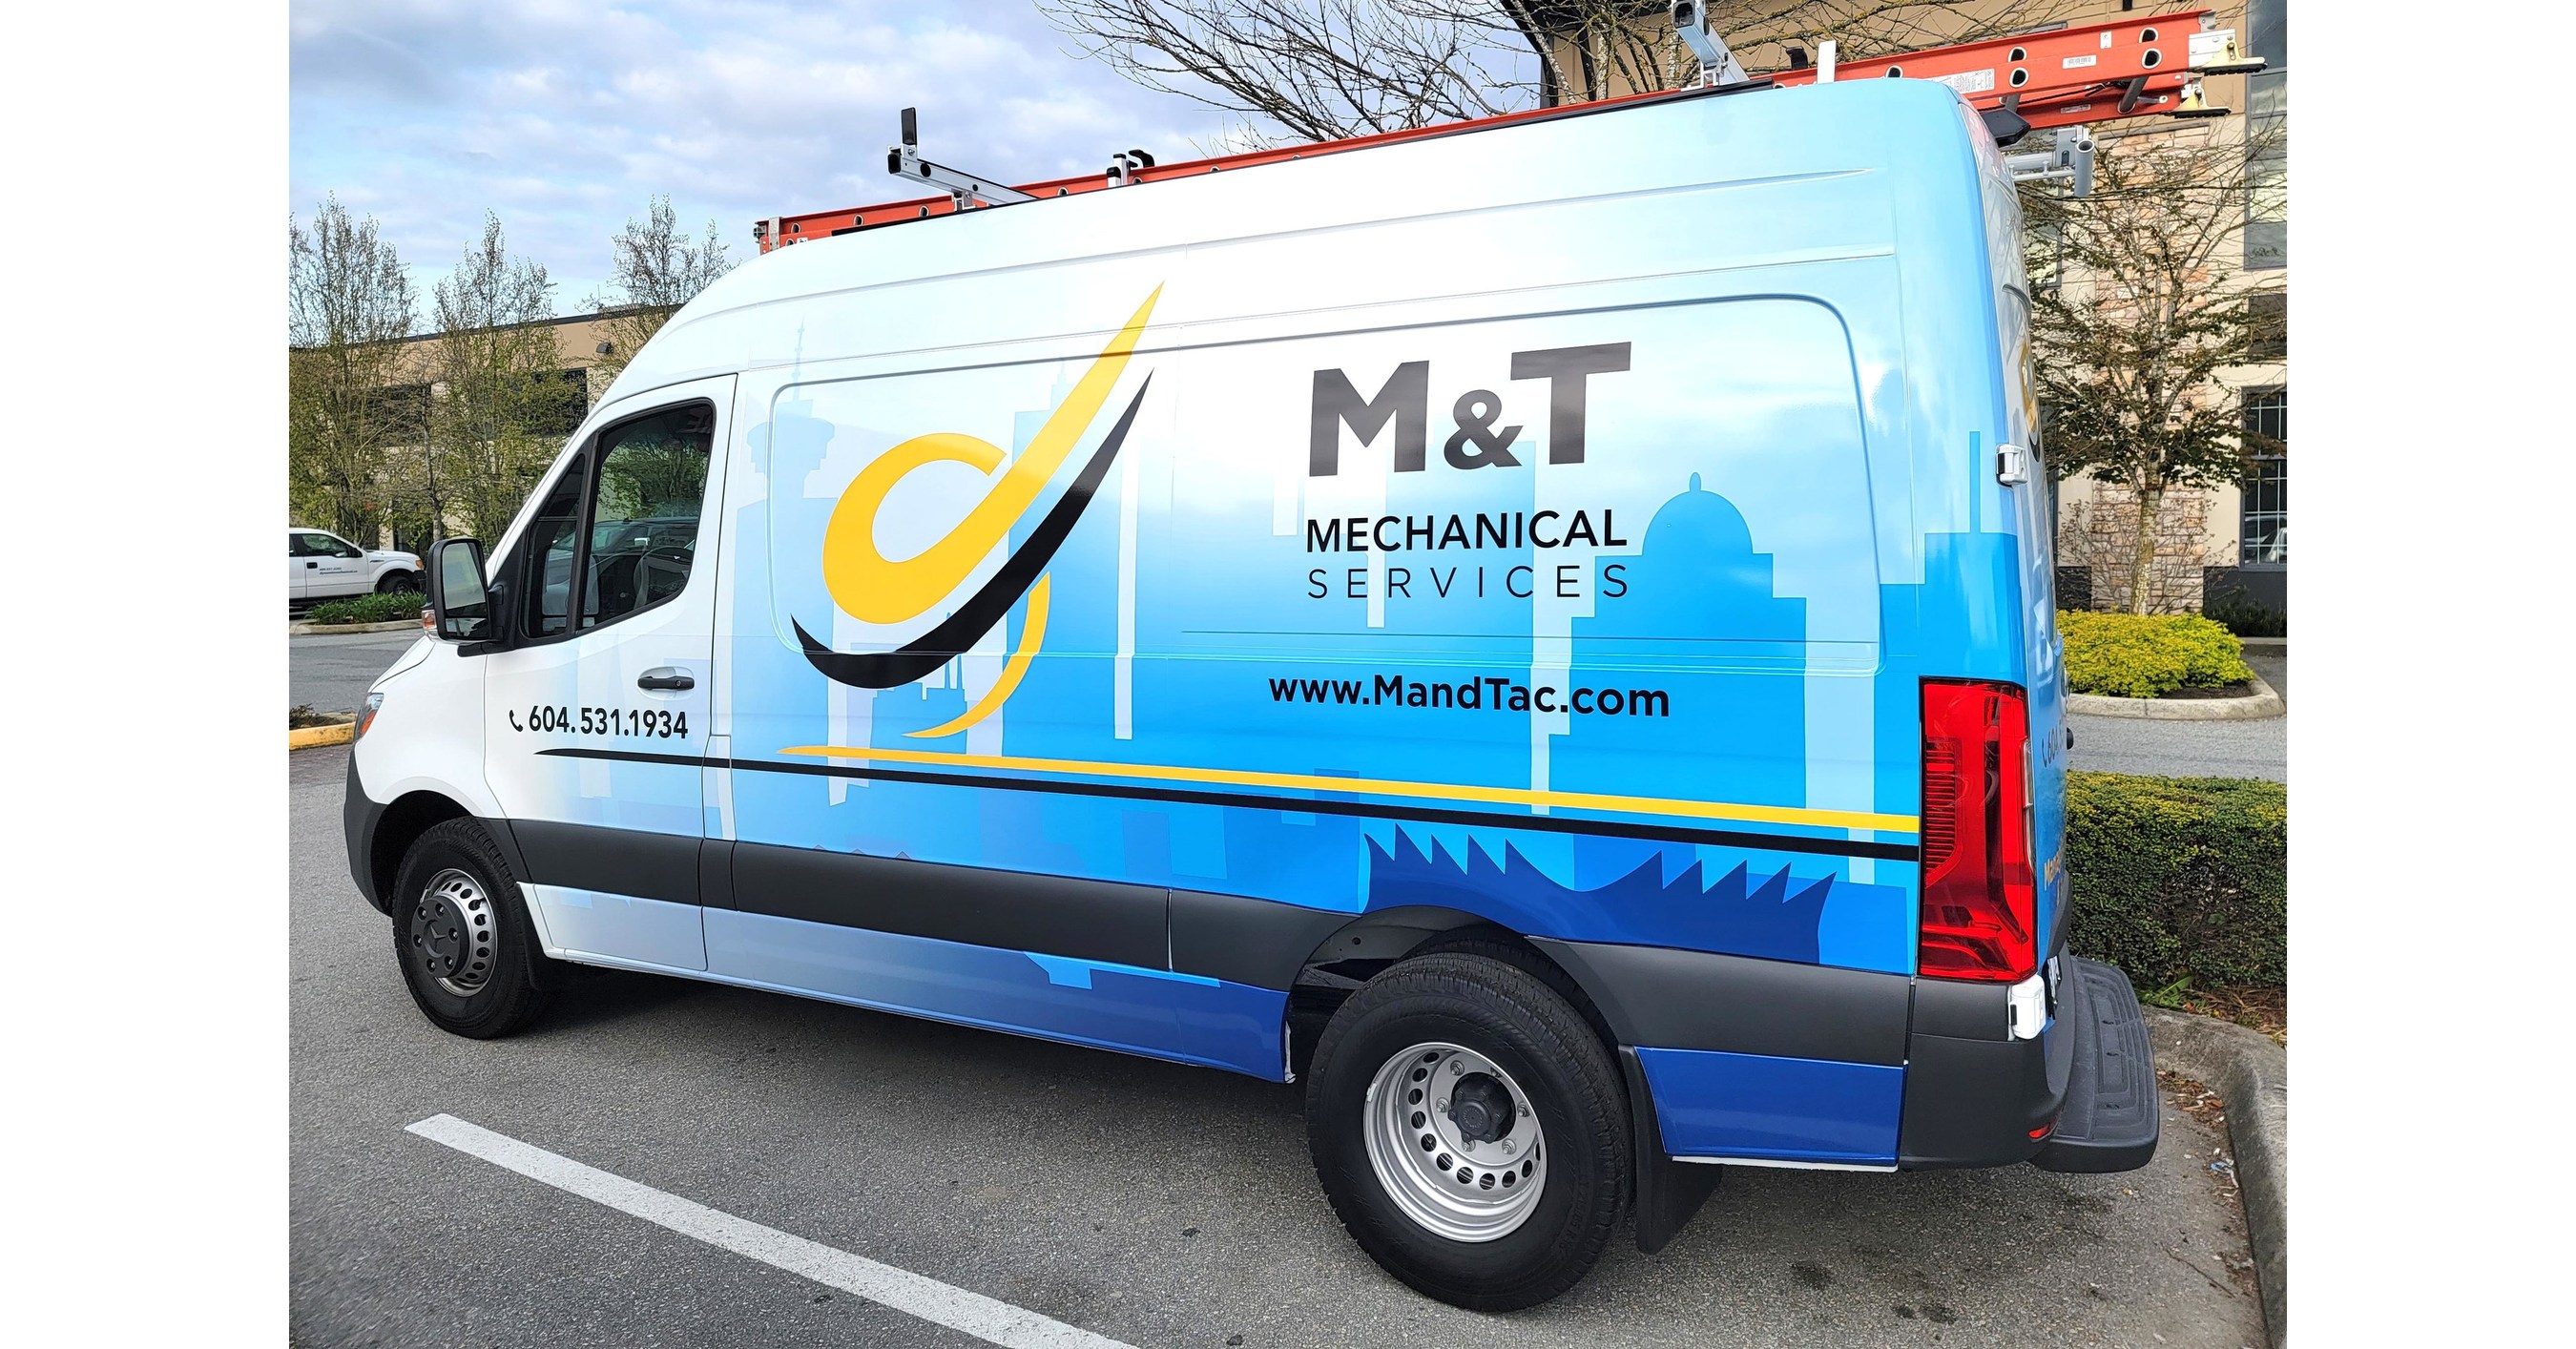 M&T Air Conditioning Announces Rebrand and Launch of New Website